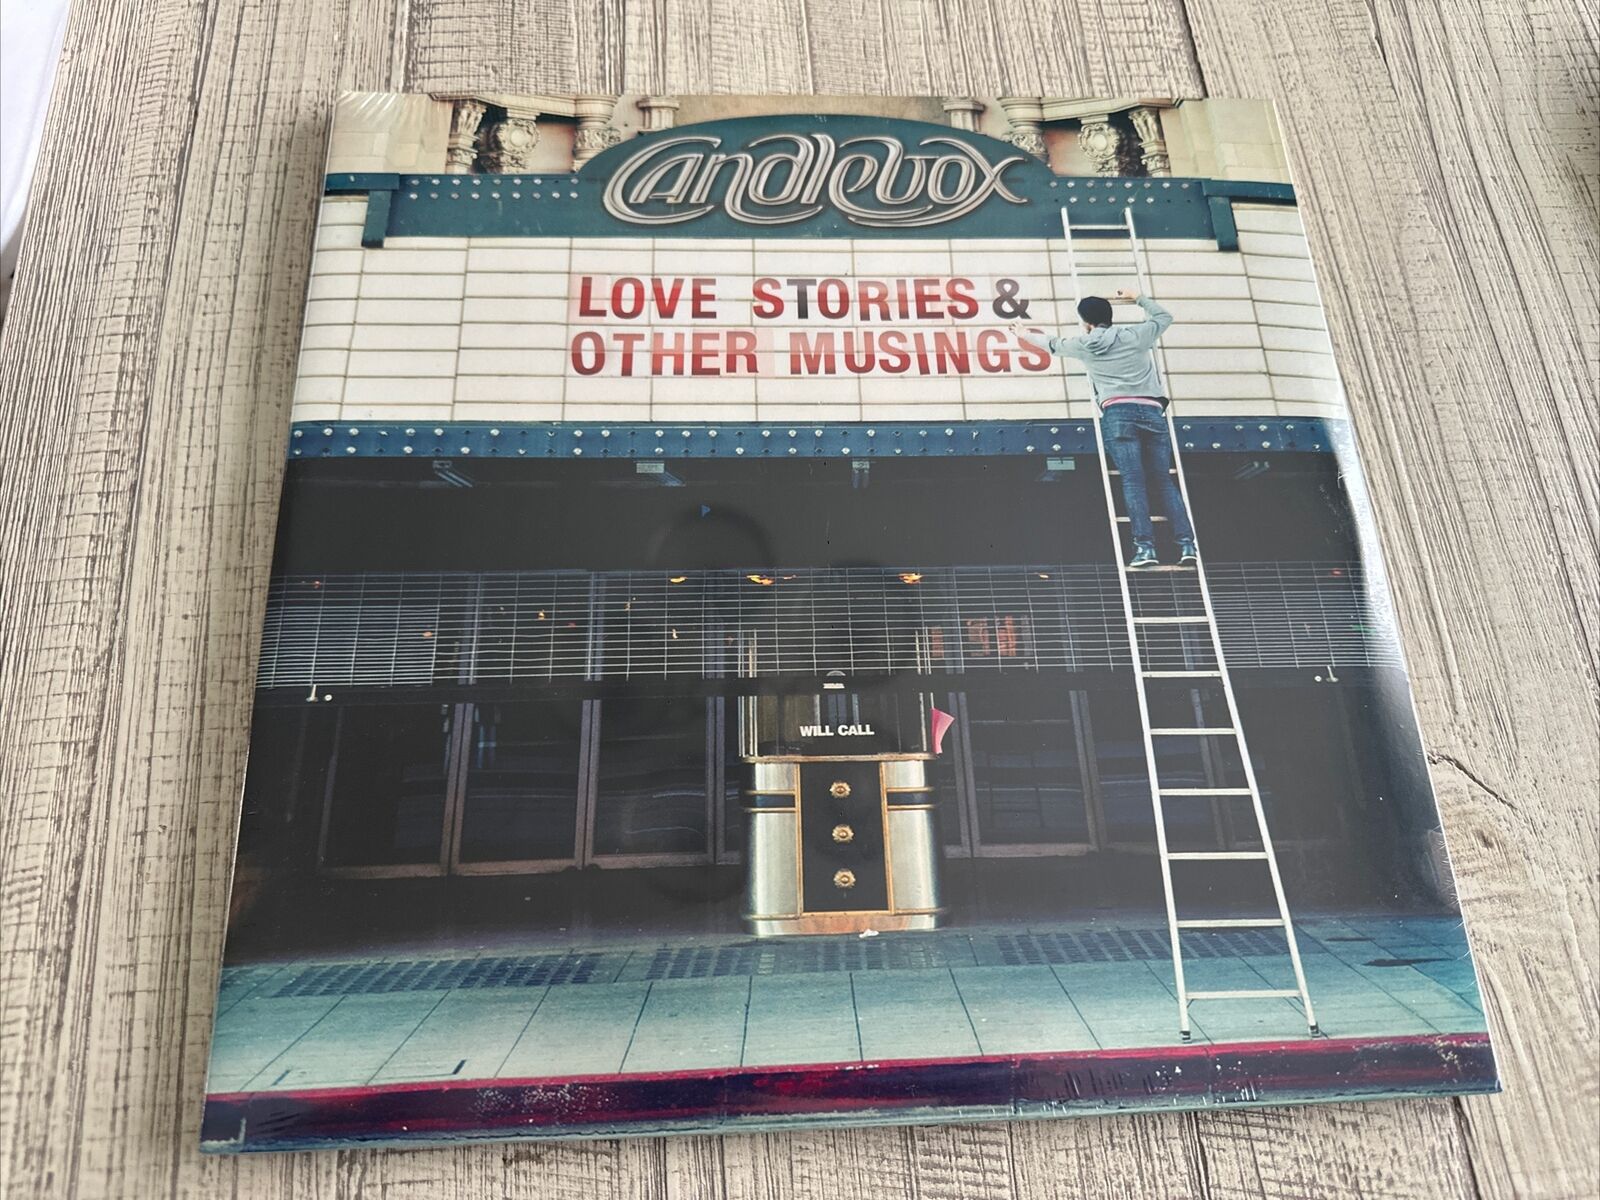 Candlebox - Love stories & Other Musings, Vinyl 2LP (Sealed) - Rare